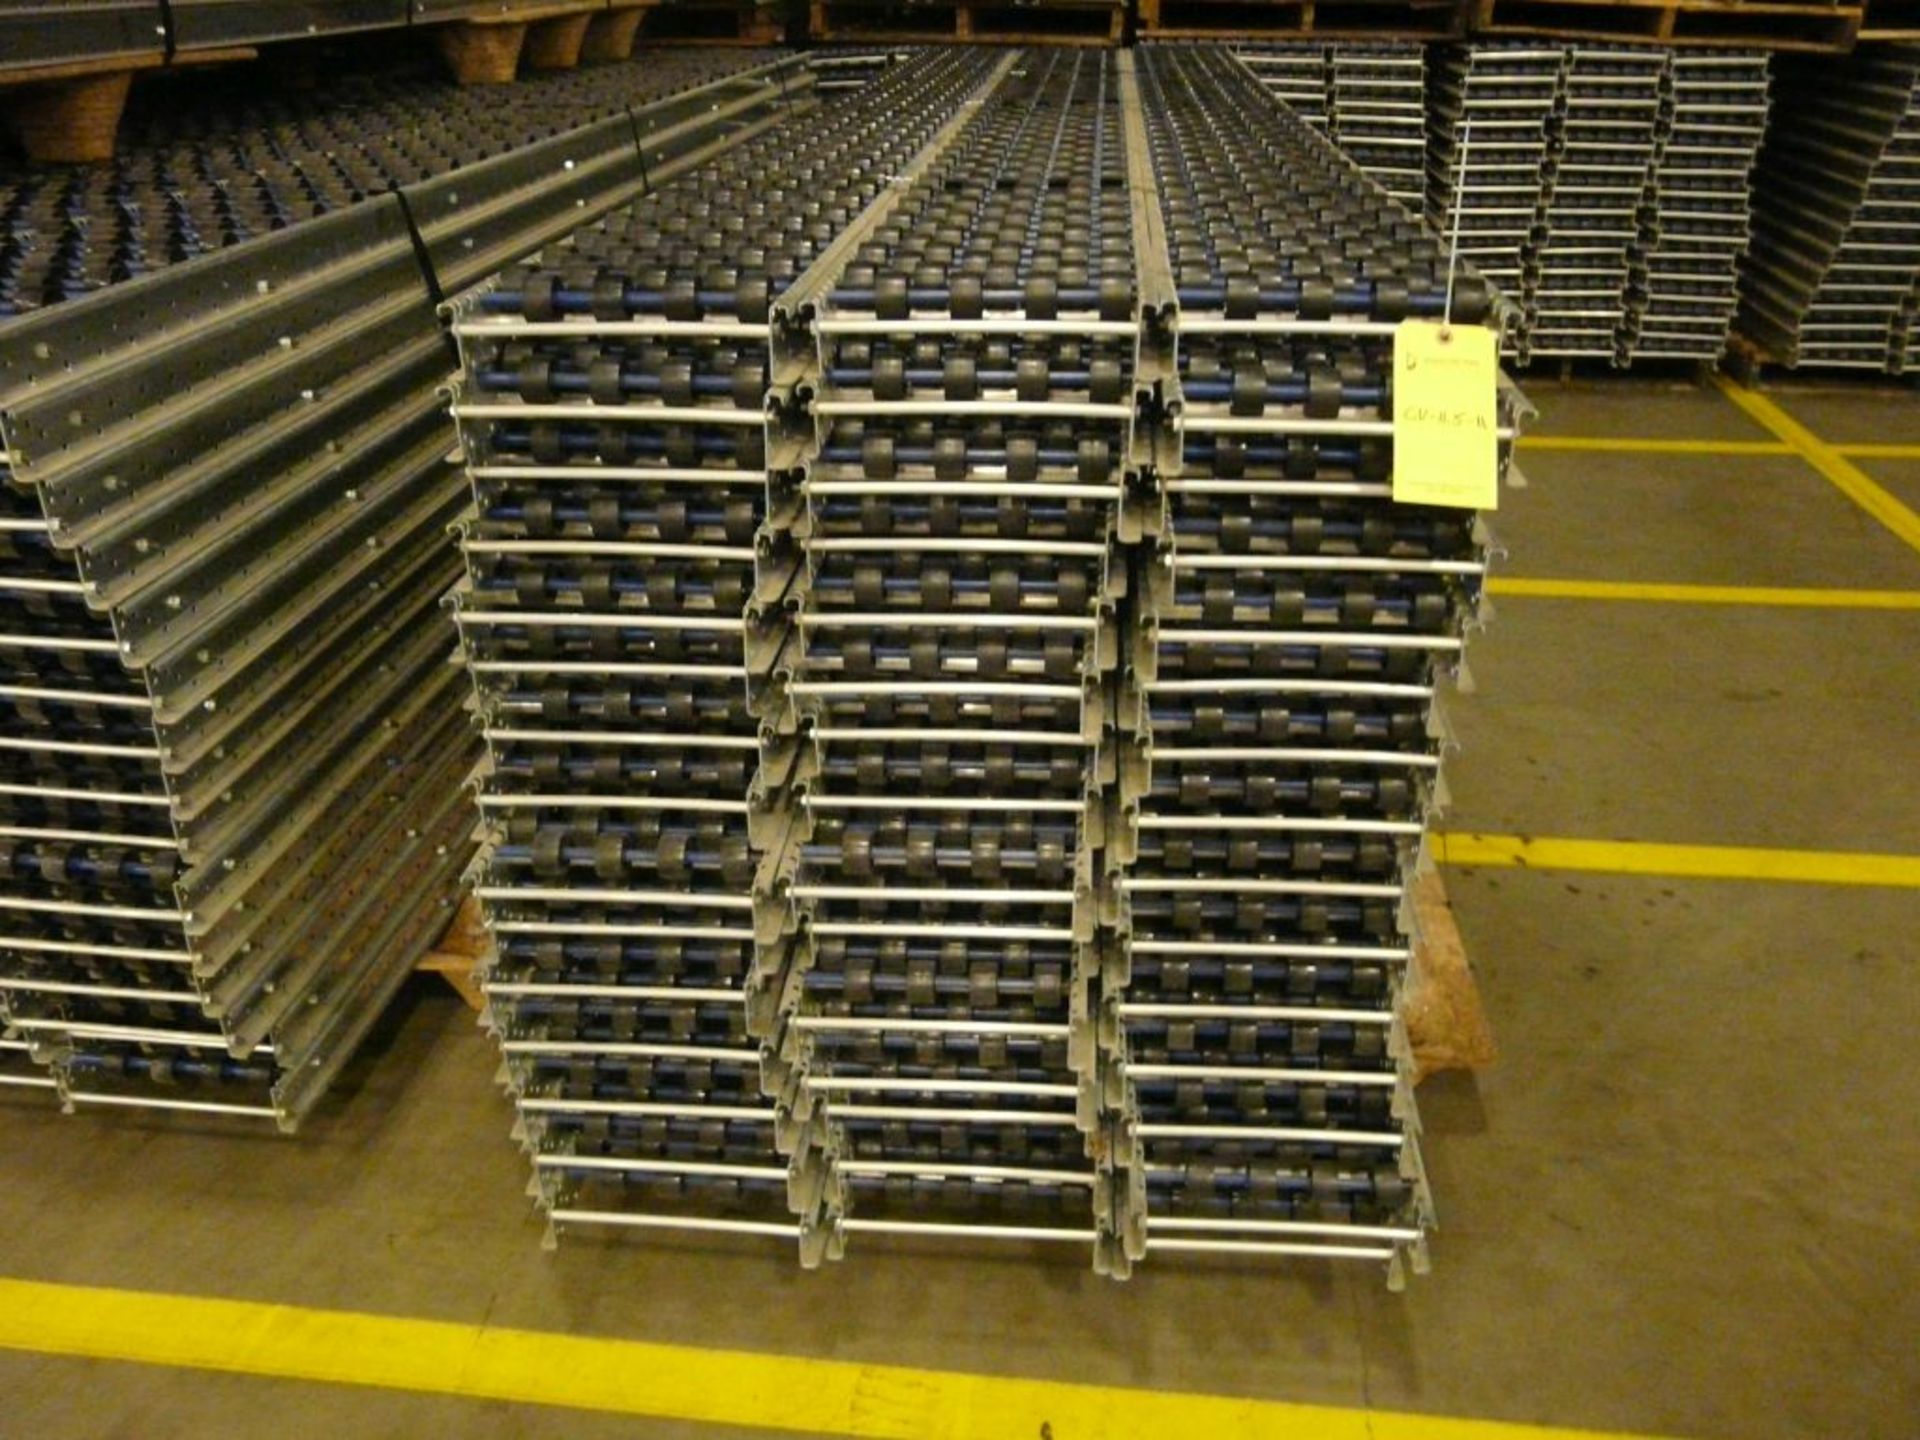 Lot of (90) SpanTrack Wheelbed Carton Flow Conveyors - 11.5'L x 11"W; Tag: 223603 - $30 Lot - Image 2 of 4